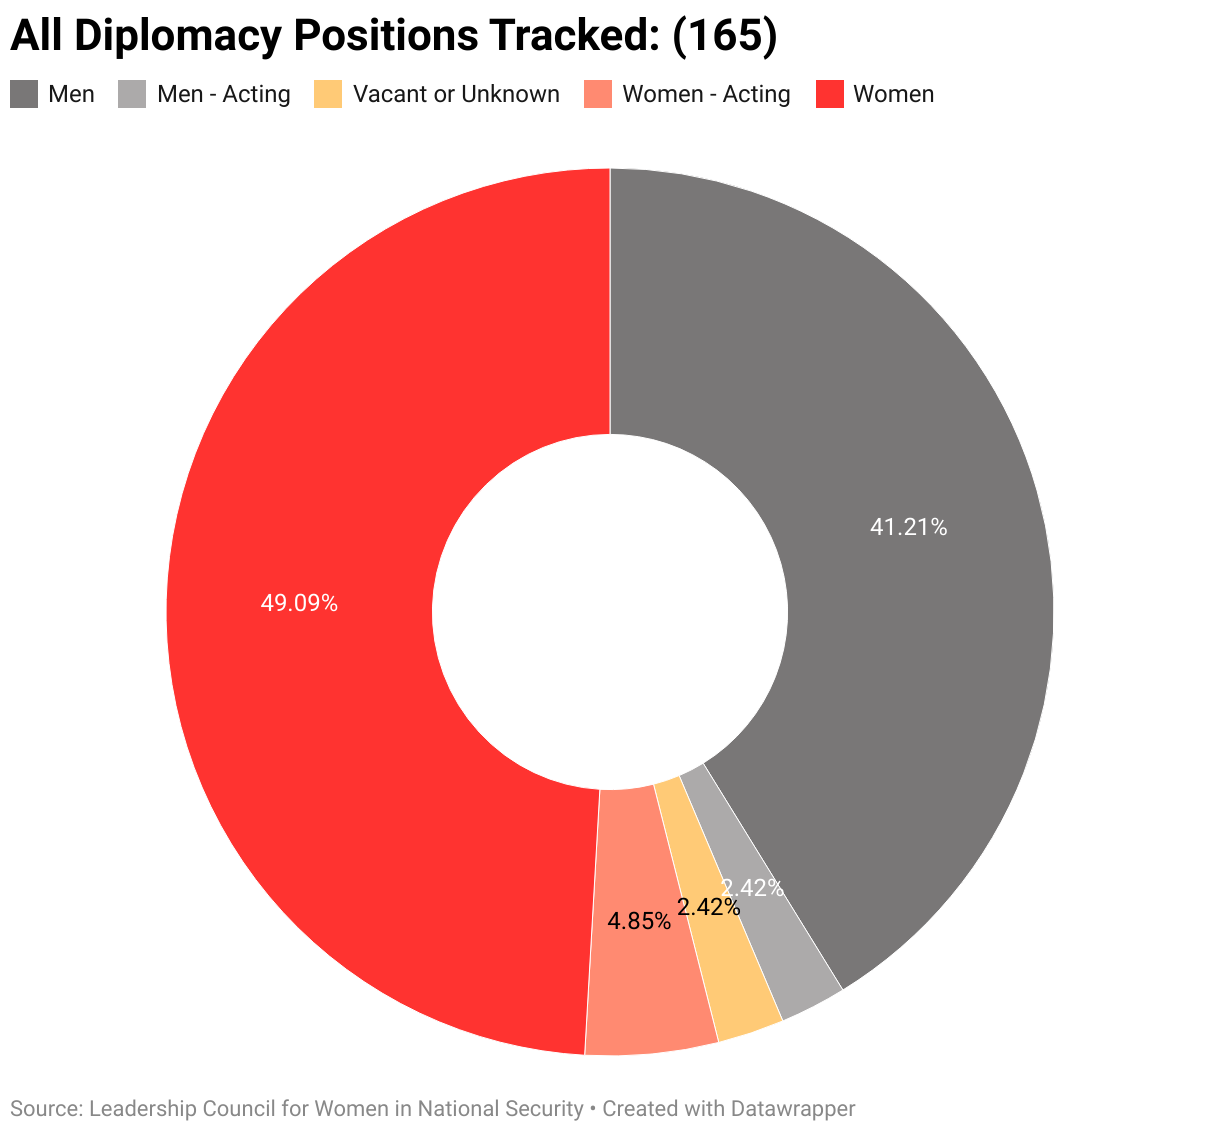 The gendered breakdown of all diplomacy positions positions tracked by LCWINS (165).